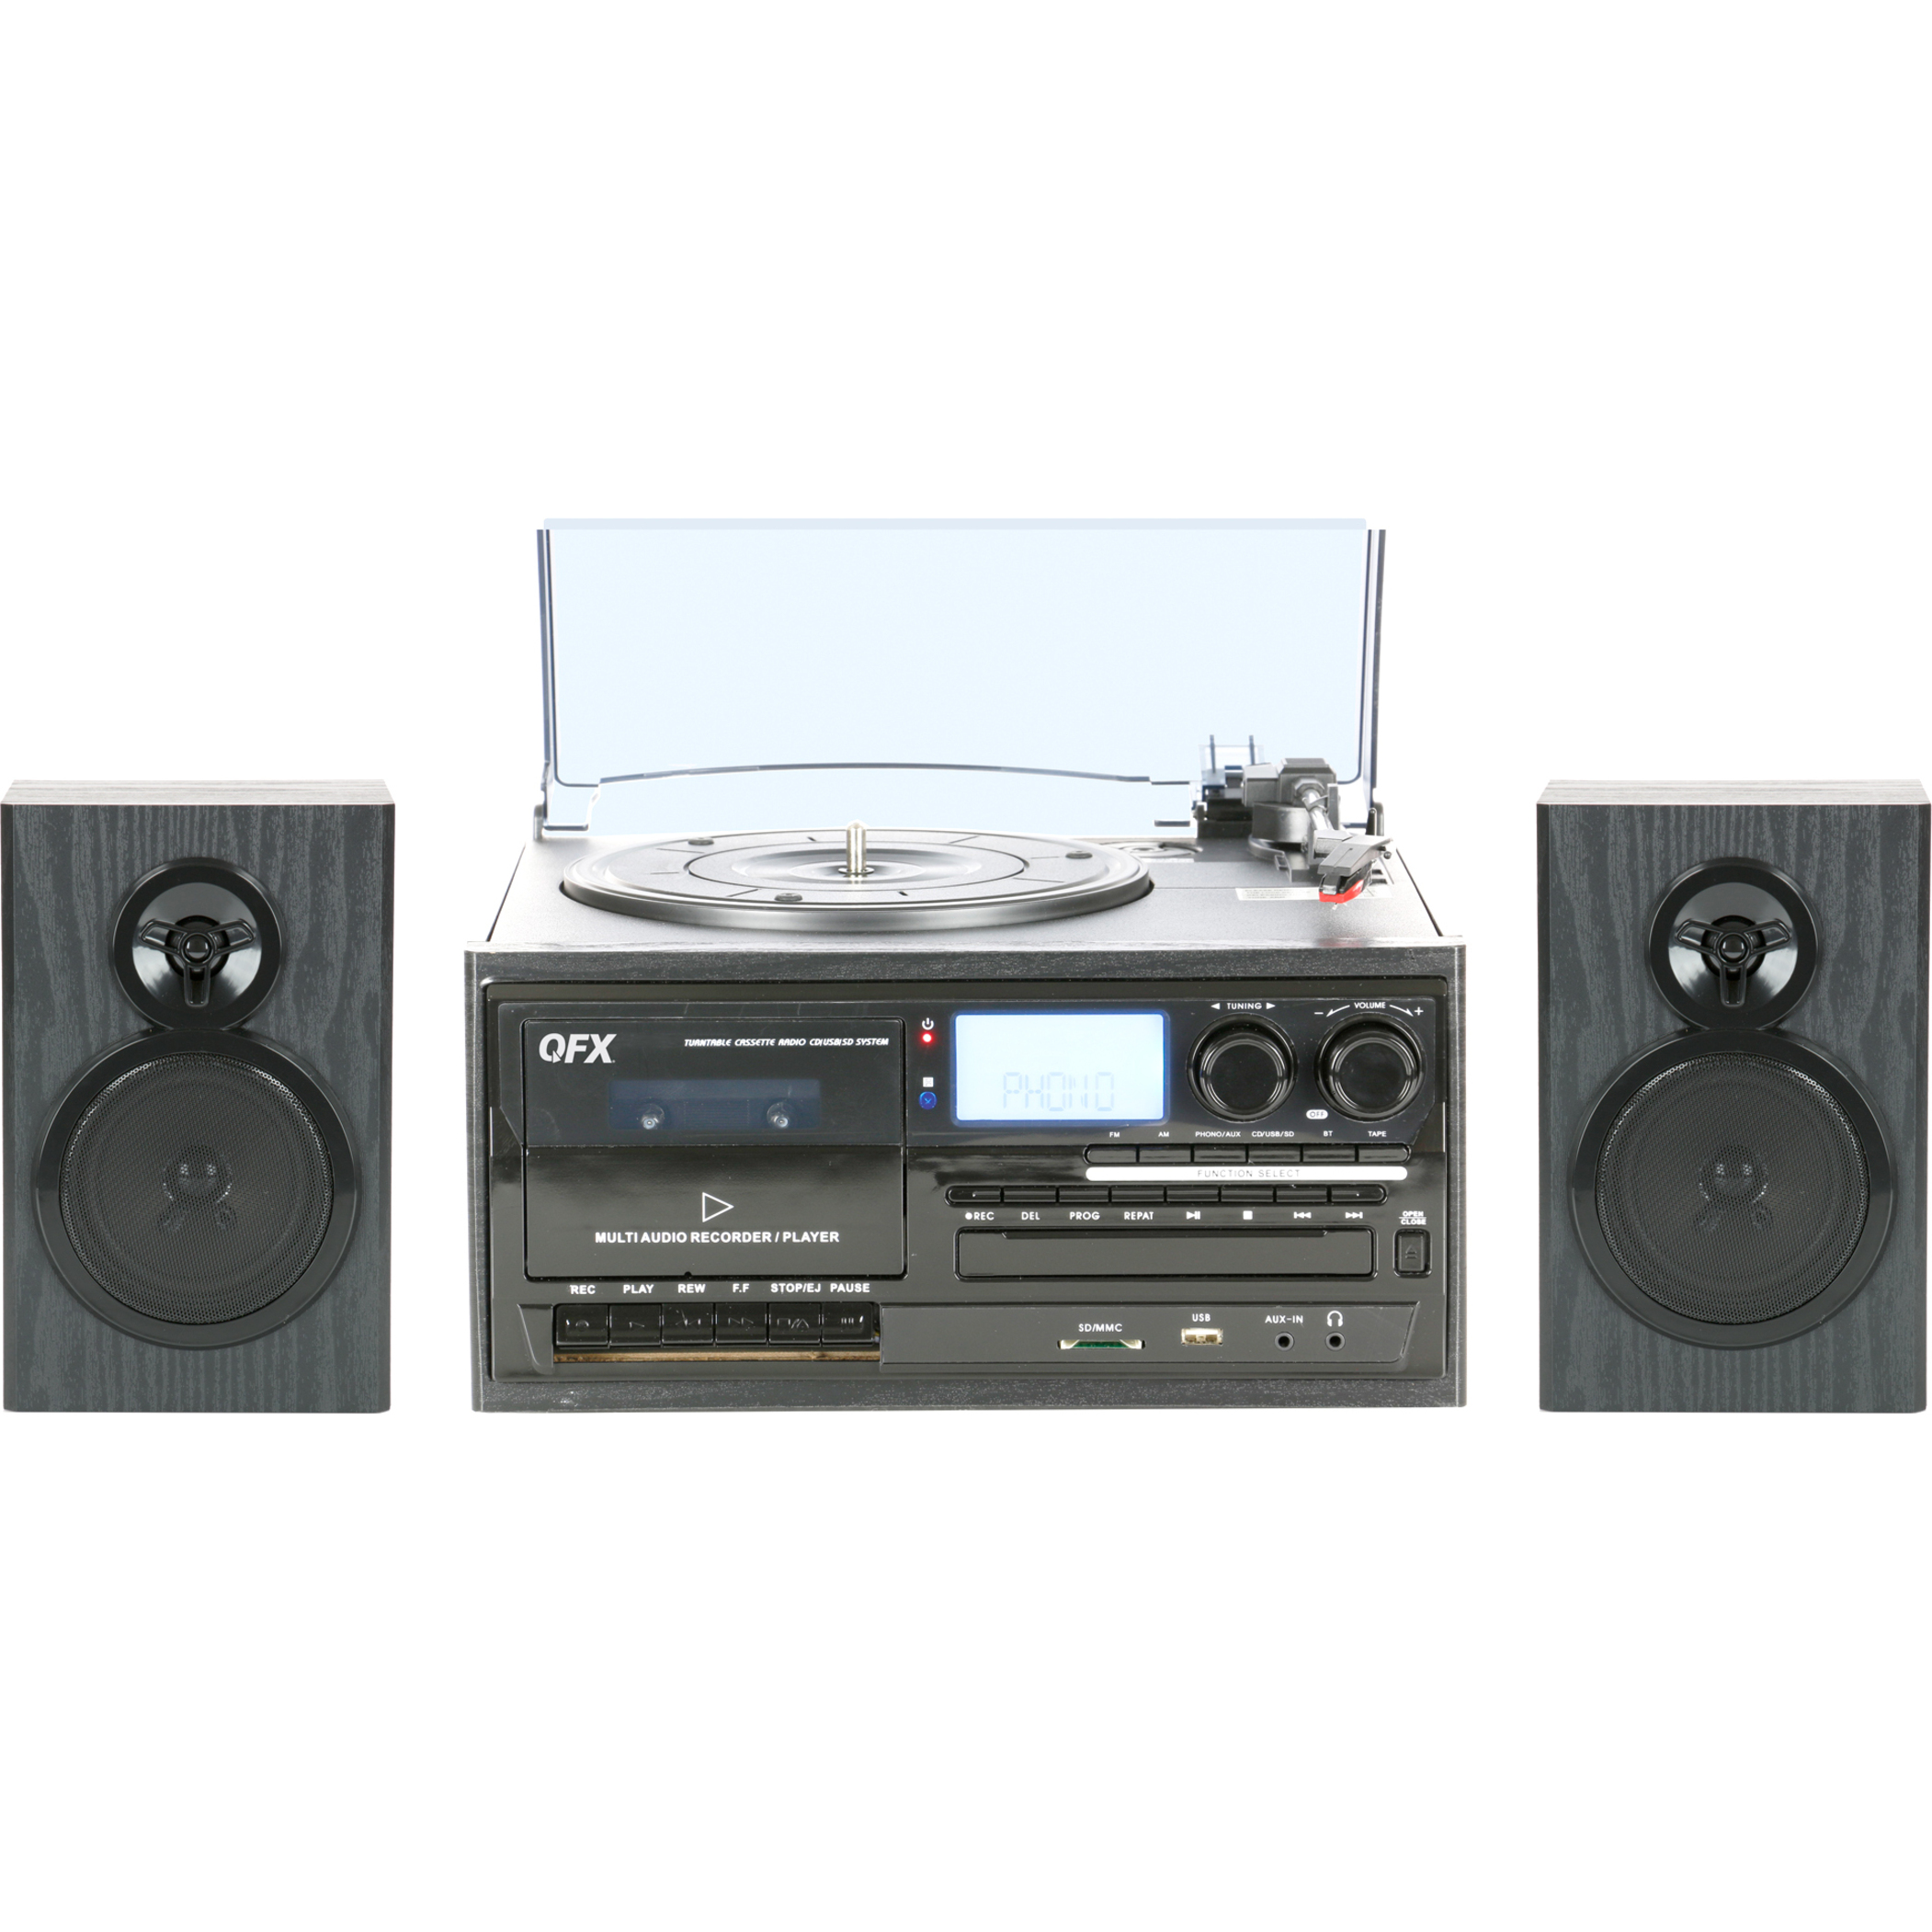 QFX TURN-250 Home Stereo w/Turntable/Cassette/CD/MP3 - image 2 of 2